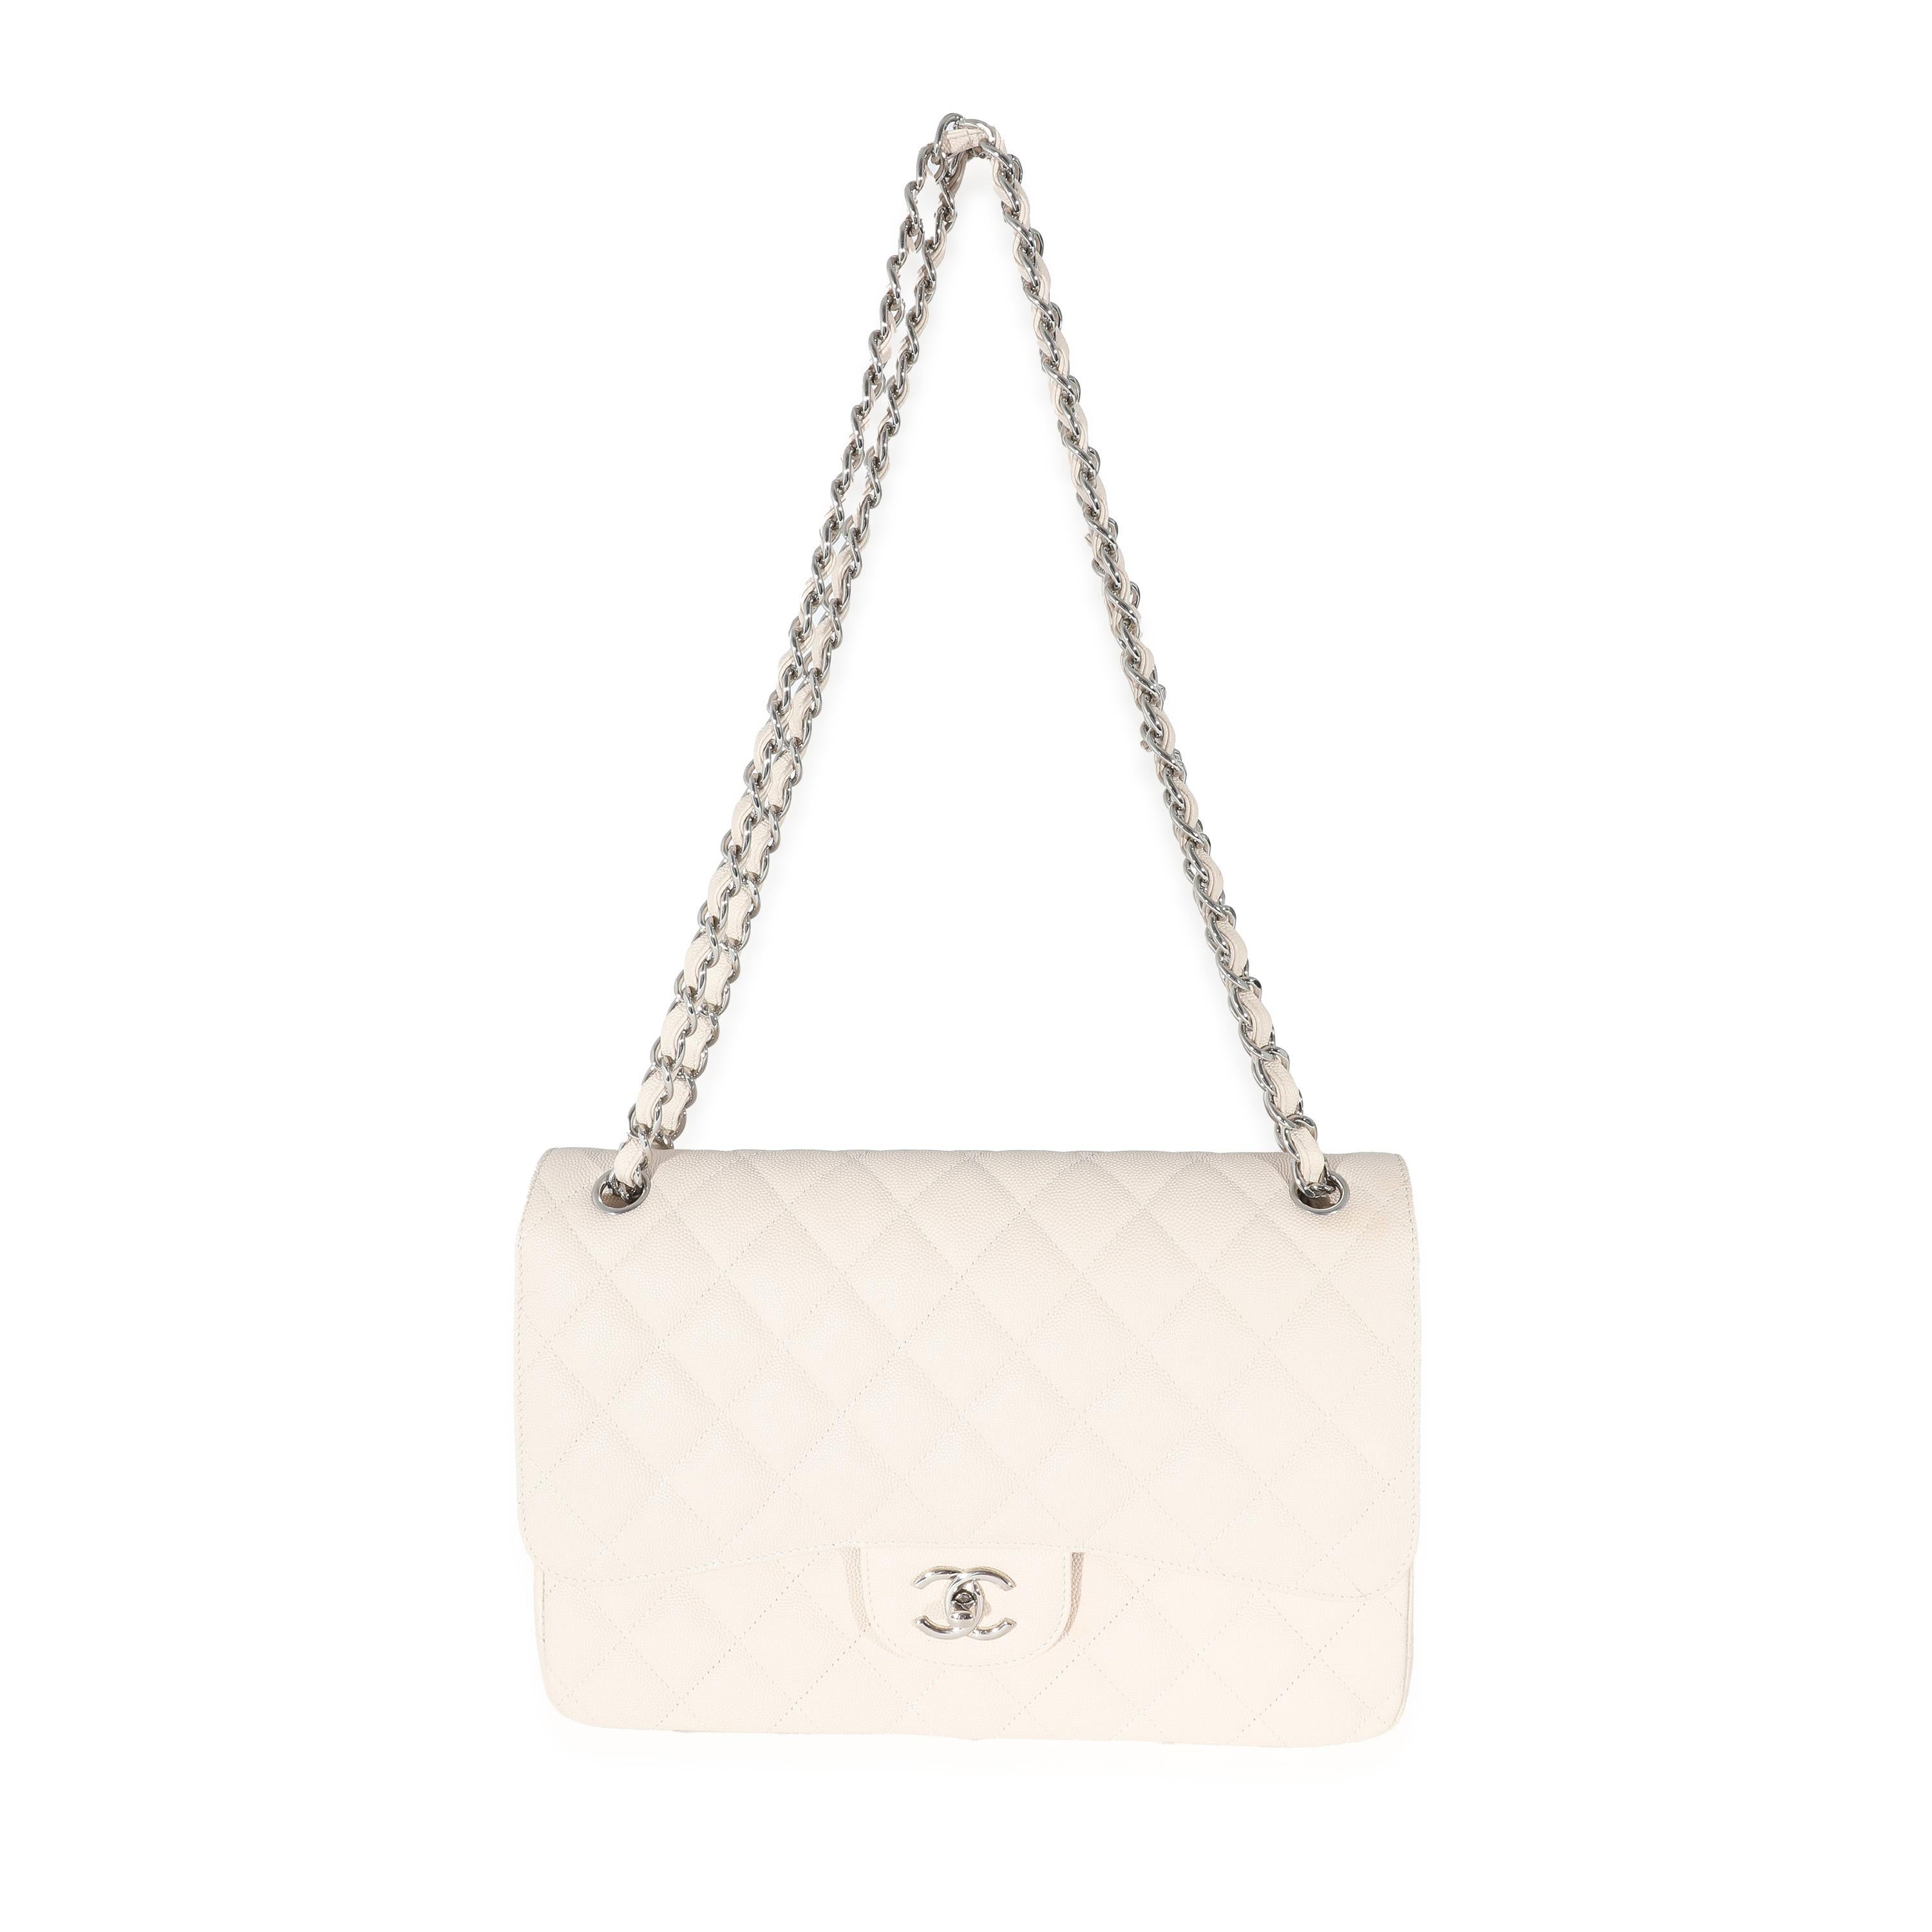 Listing Title: Chanel Cream Quilted Caviar Jumbo Classic Double Flap Bag
SKU: 133418
Condition: Pre-owned 
Condition Description: A timeless classic that never goes out of style, the flap bag from Chanel dates back to 1955 and has seen a number of